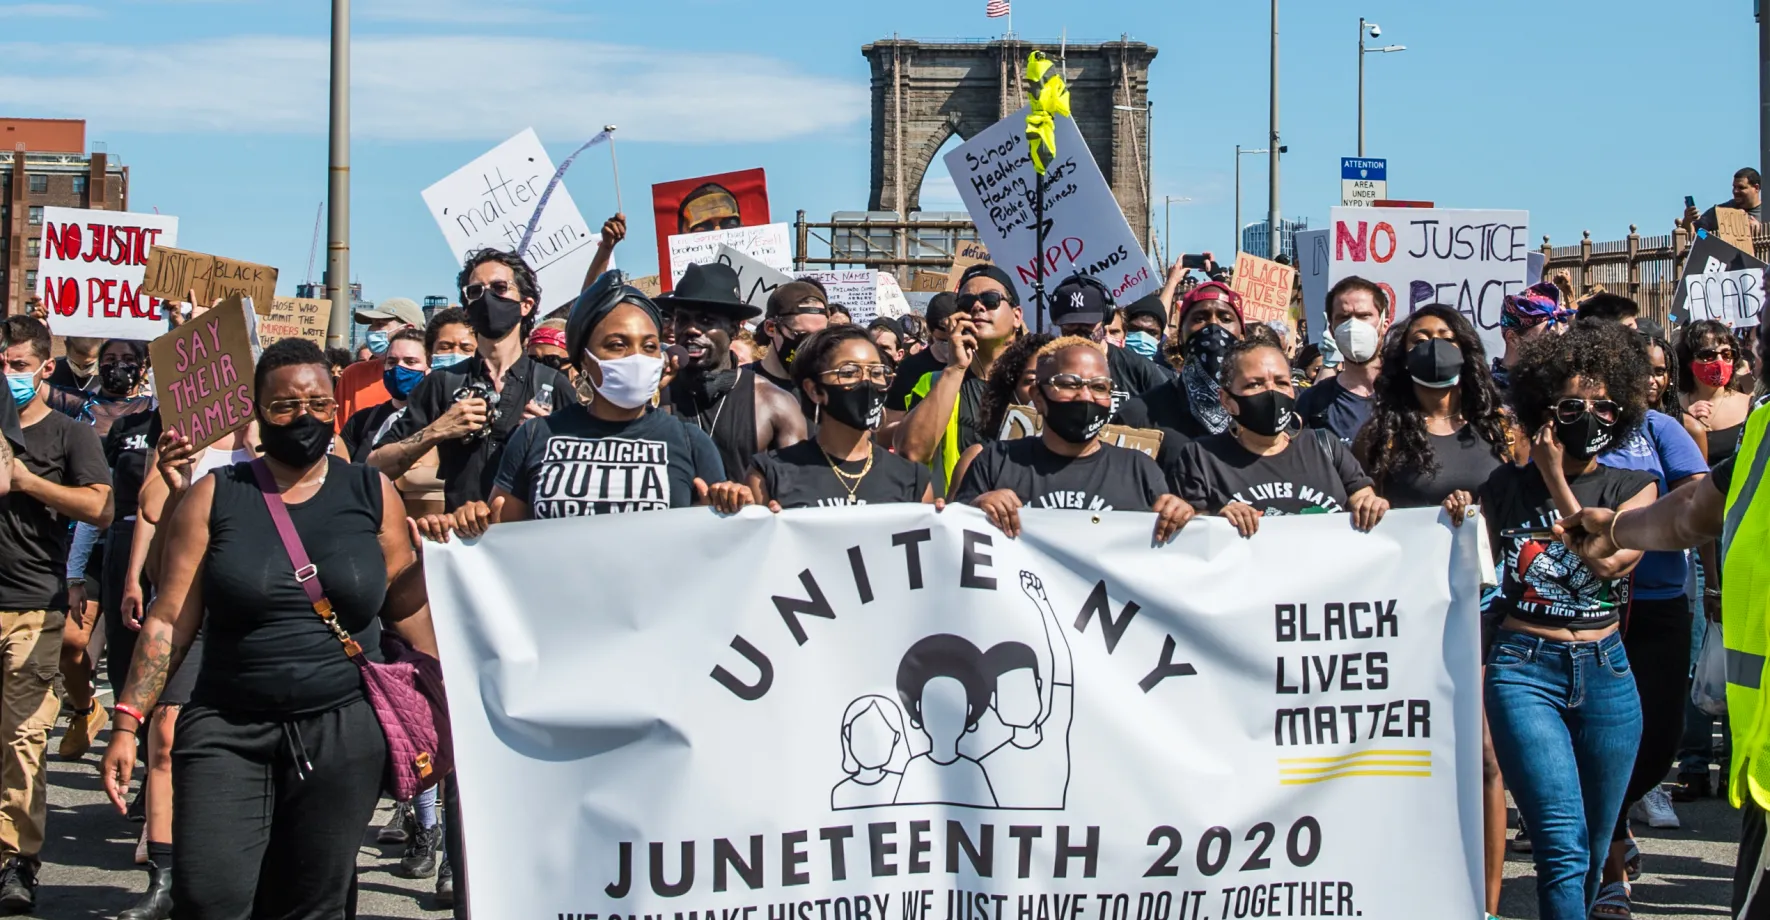 People marching with a Juneteenth banner.